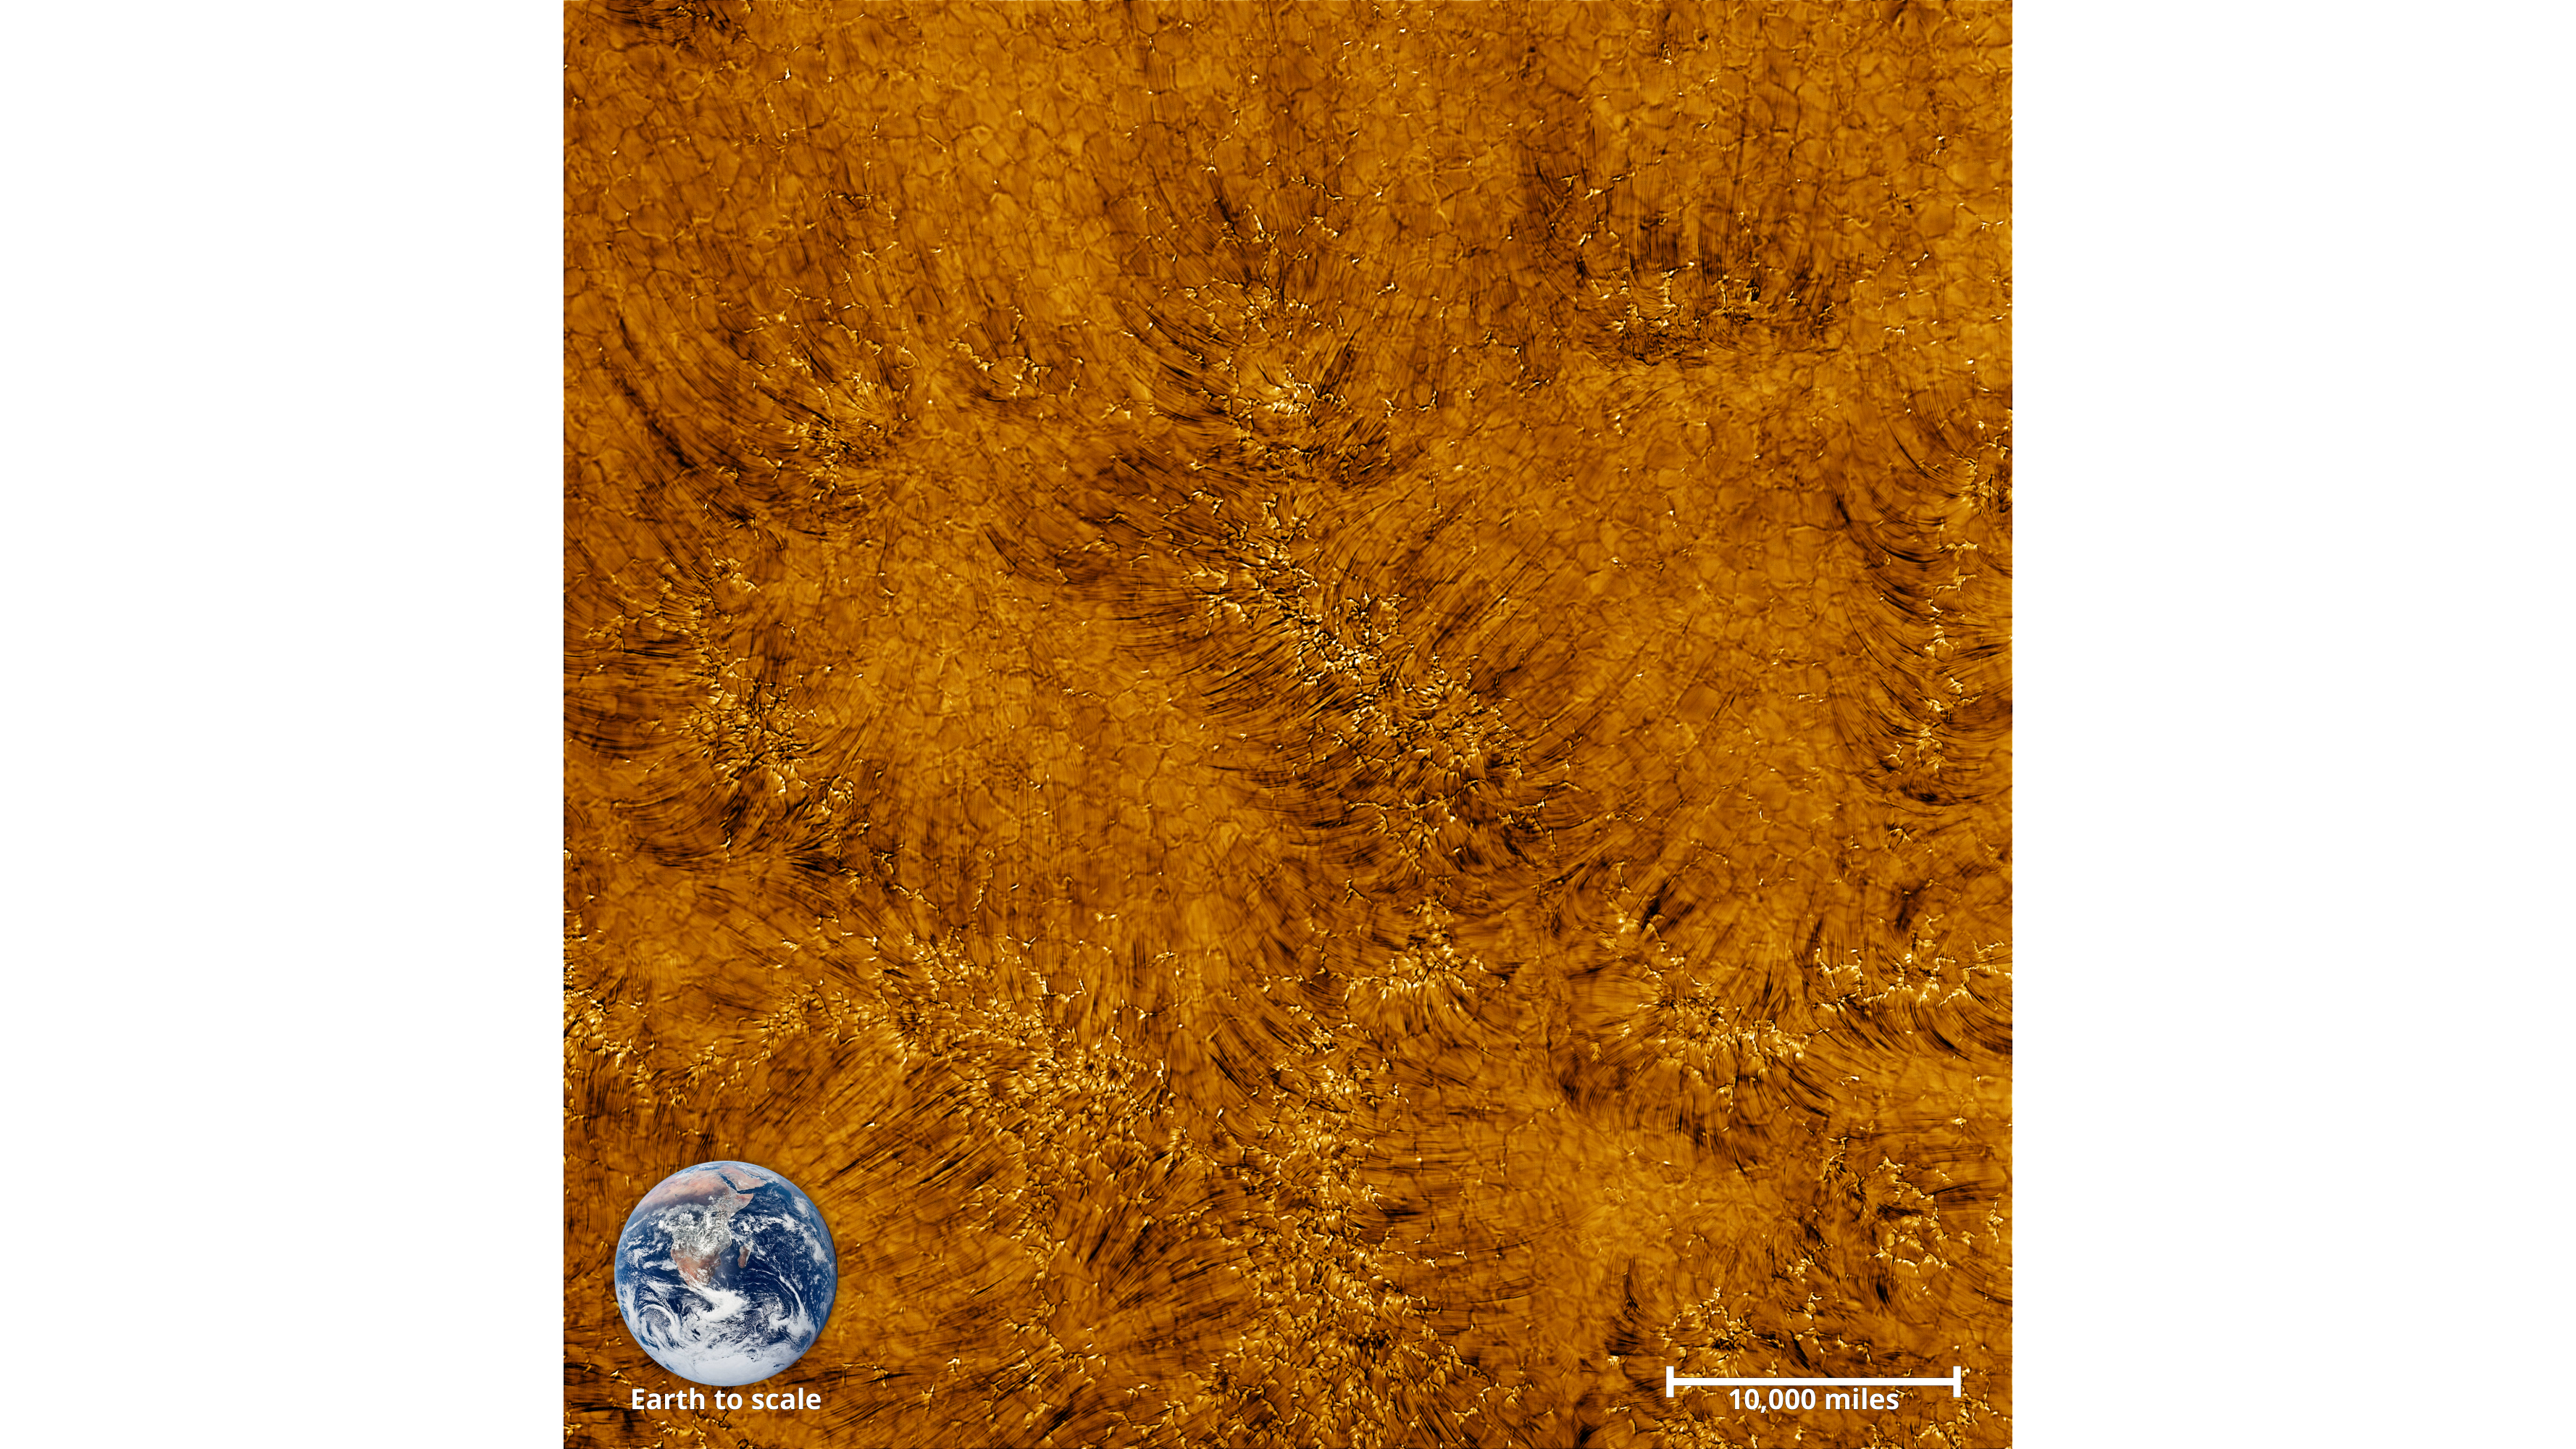 small image of earth over yellow textured sun surface